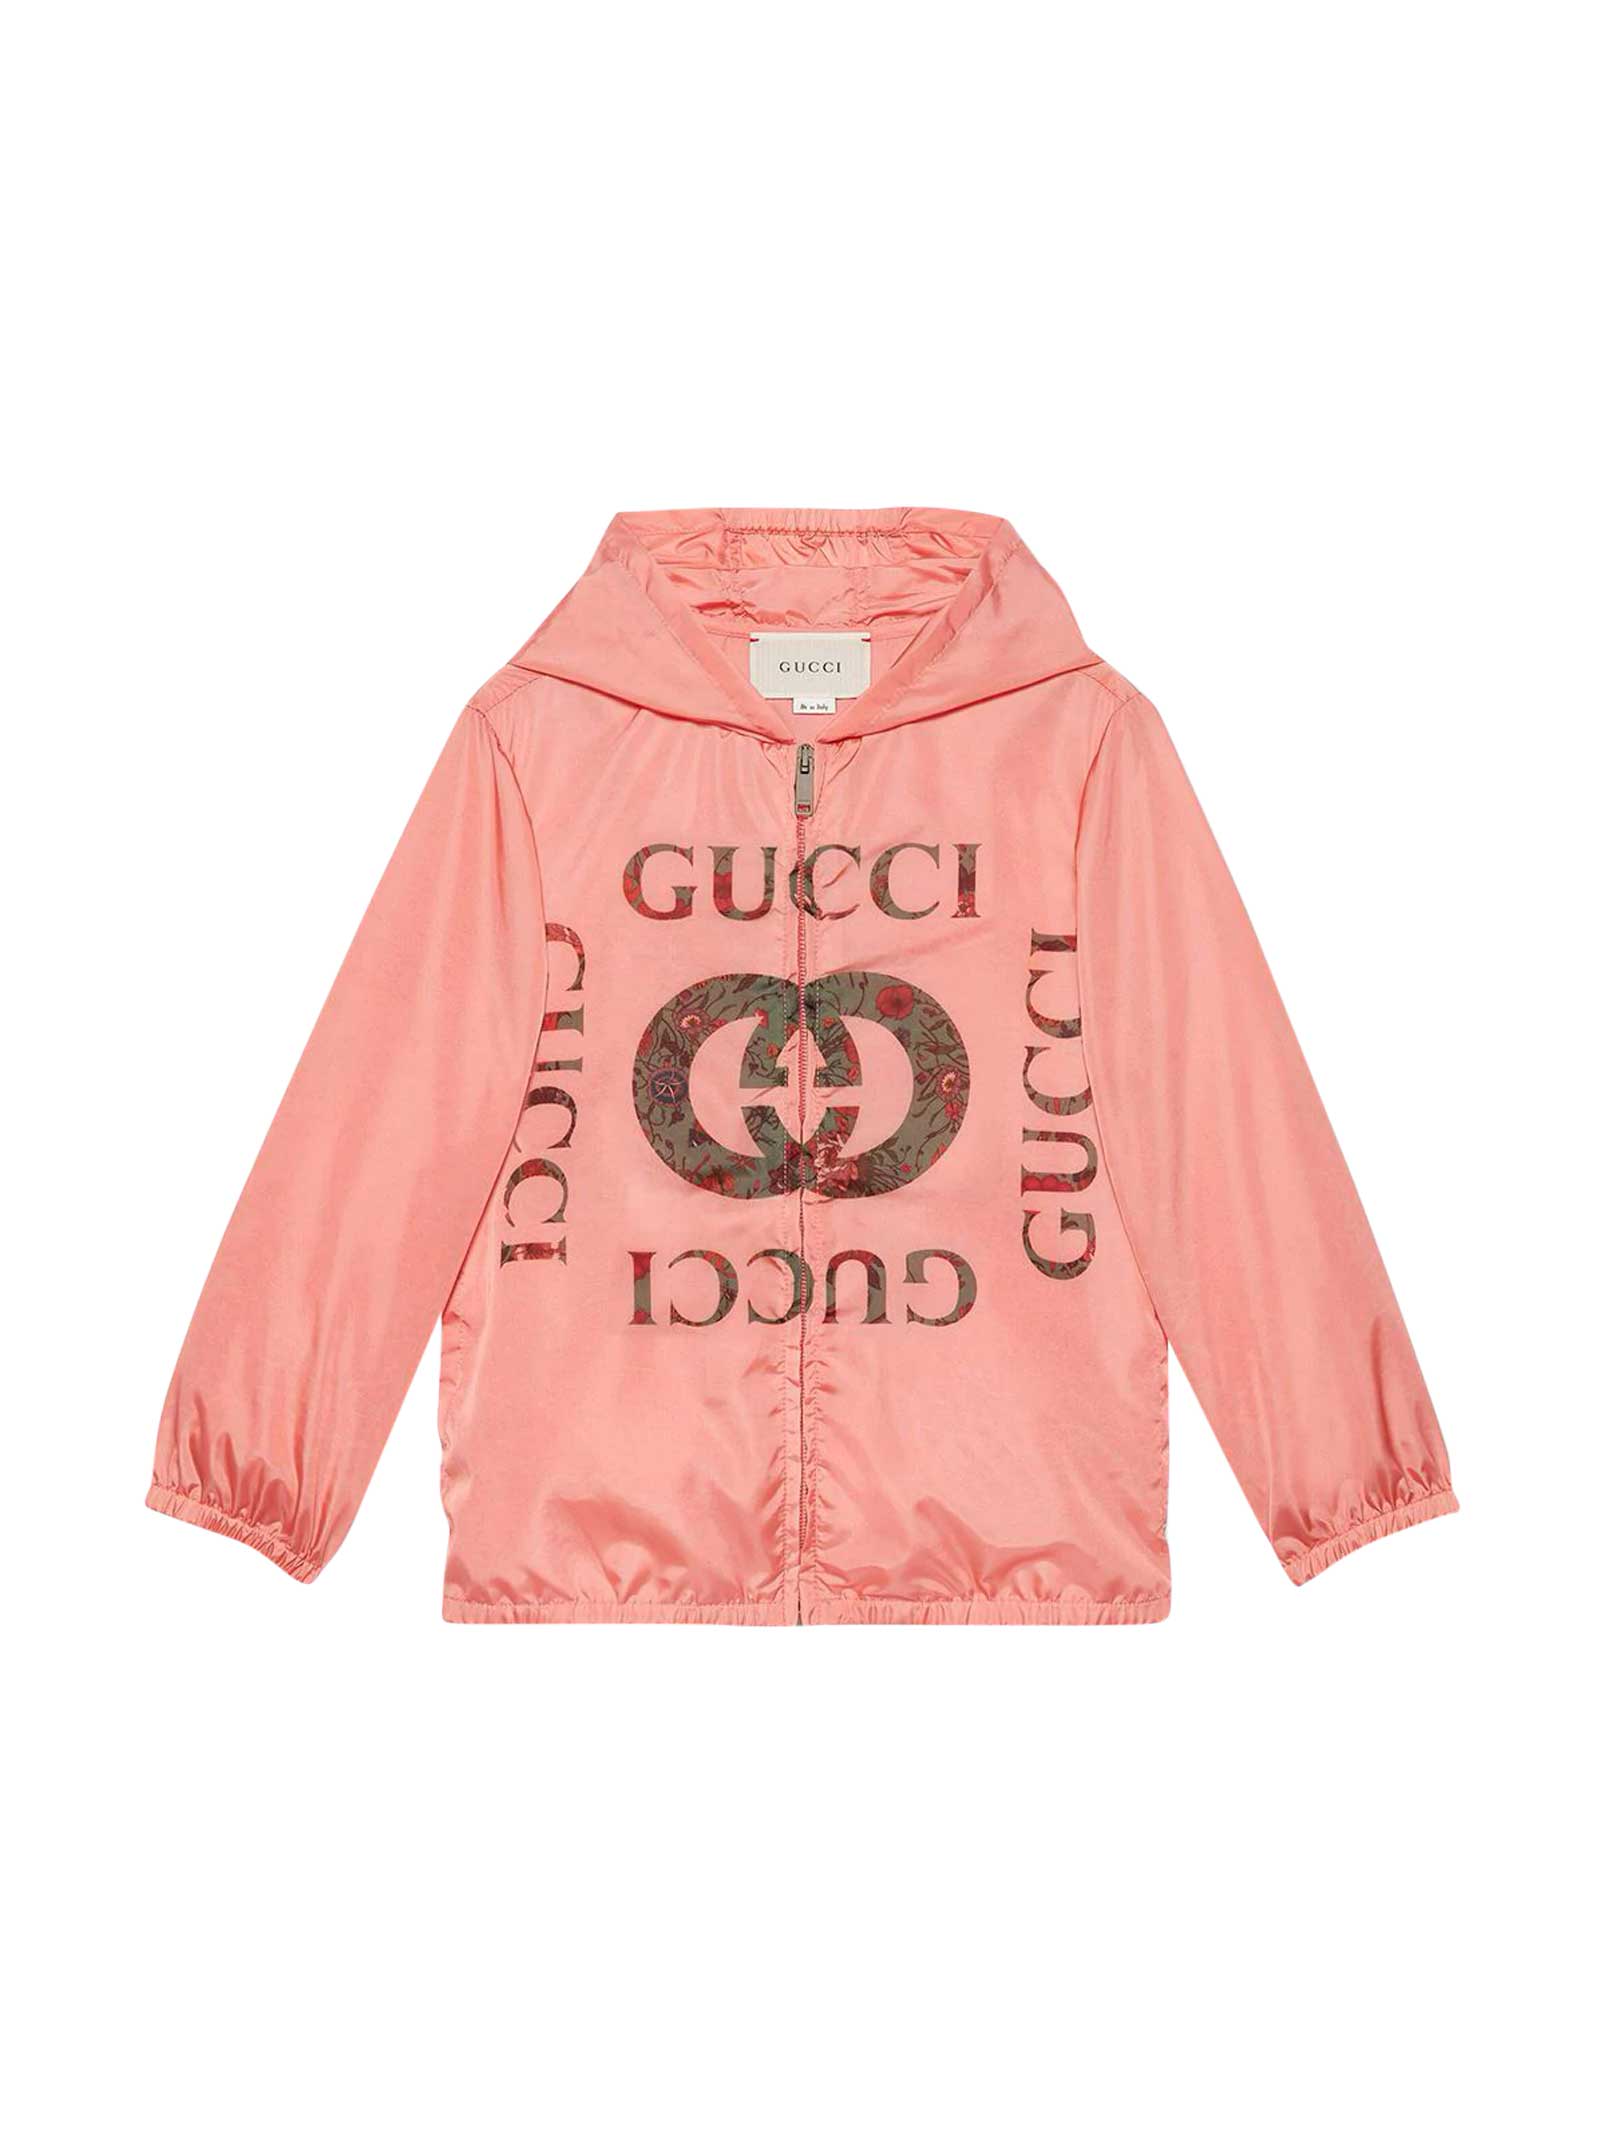 Gucci Pink Lightweight Jacket With Hood And Print